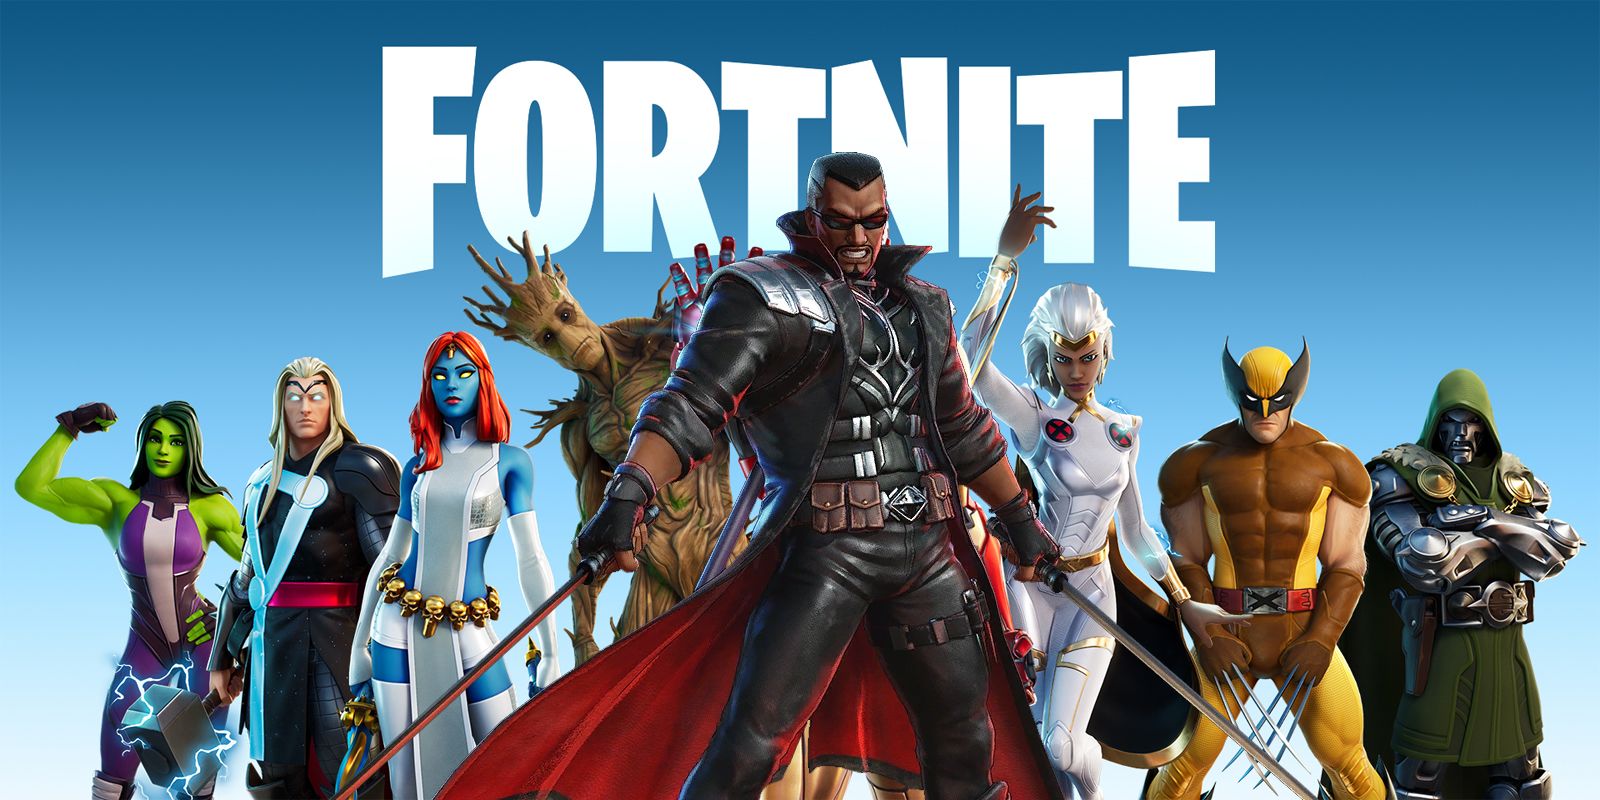 Fortnite teasers point to Blade as the next in-game hero - Fortnite INTEL